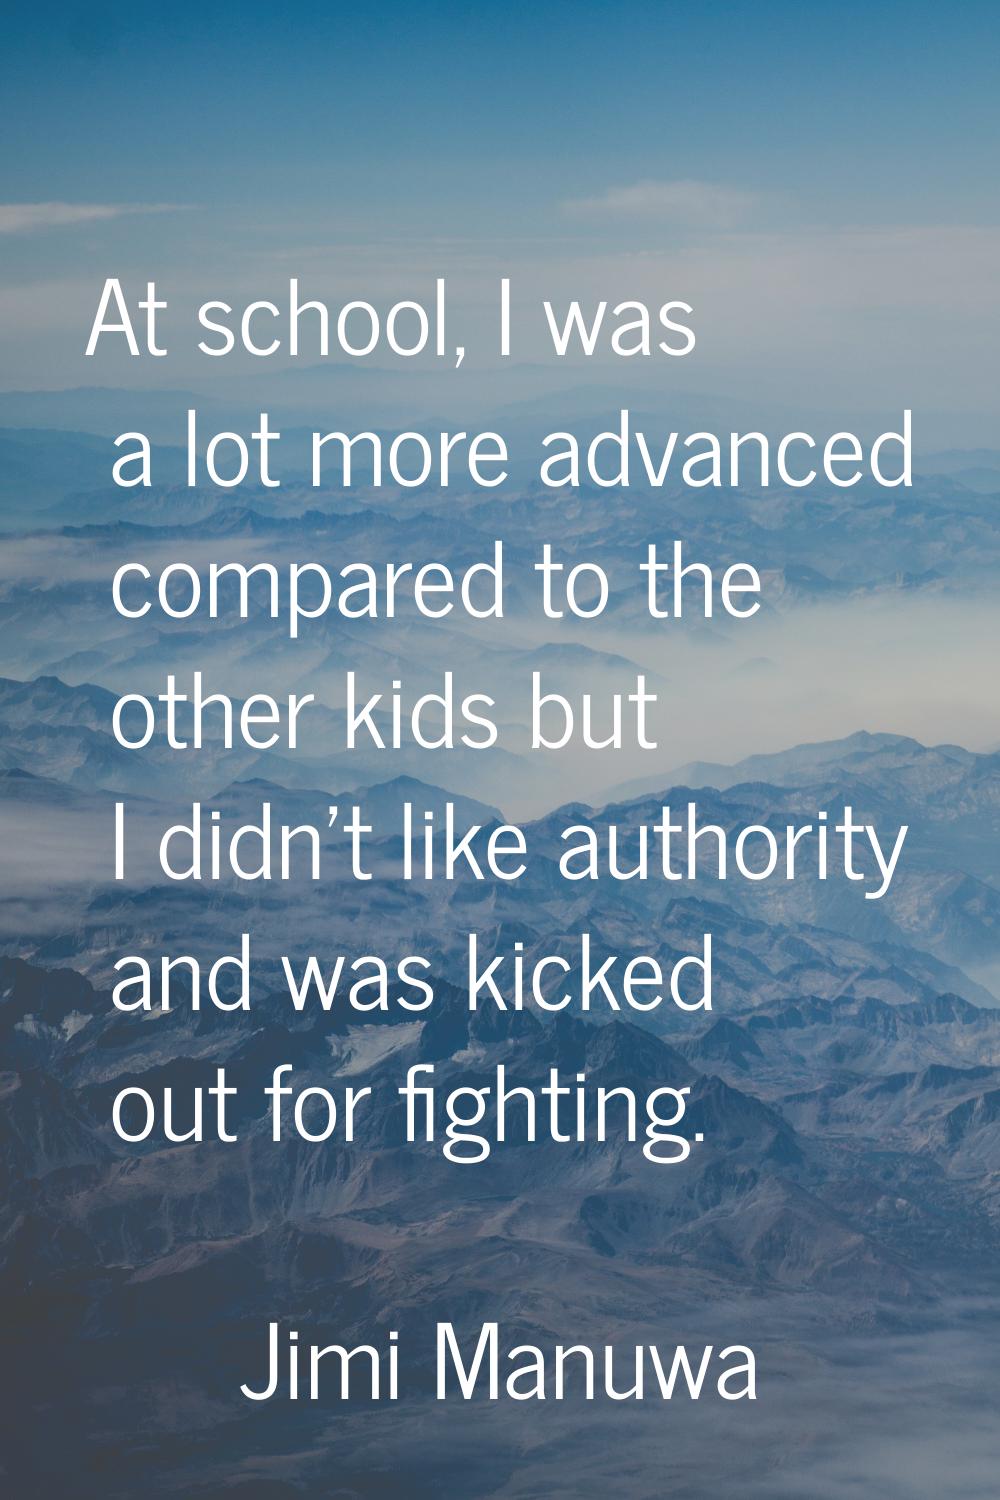 At school, I was a lot more advanced compared to the other kids but I didn't like authority and was